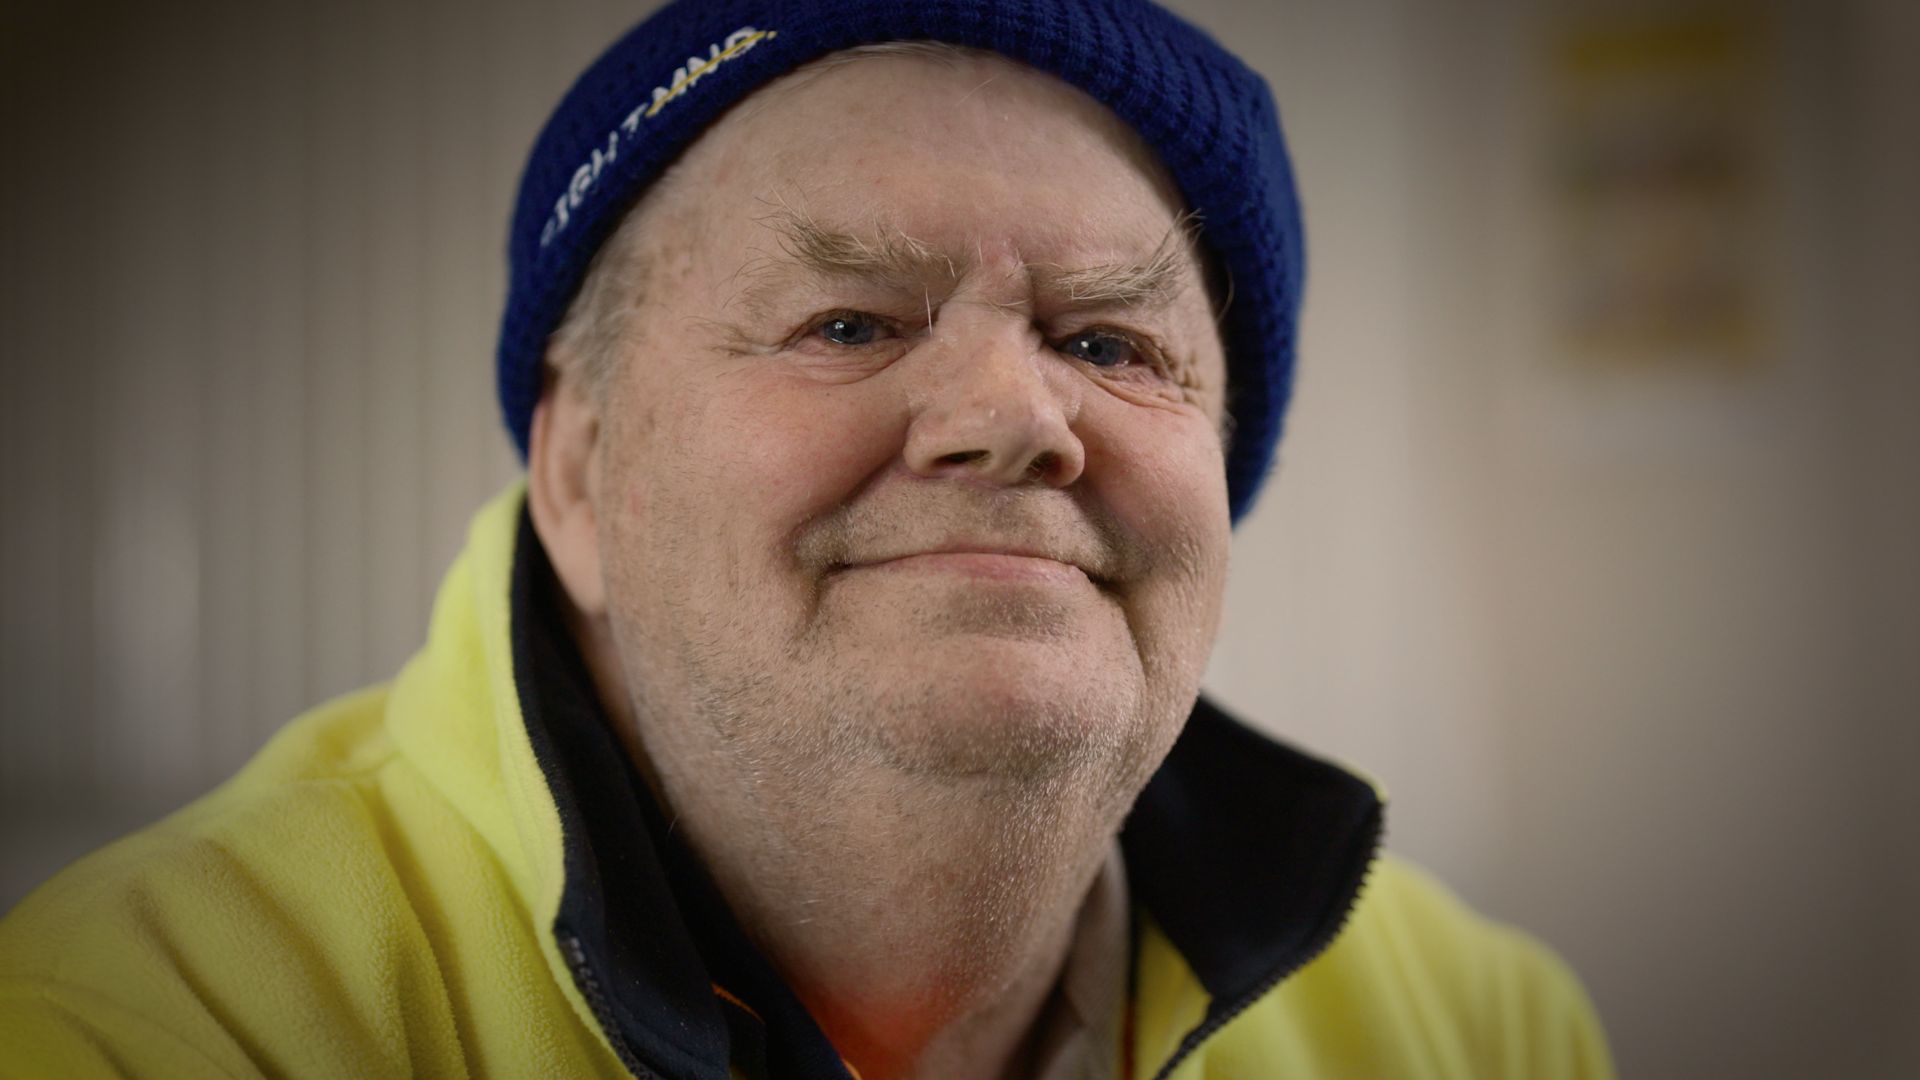 Headshot of man smiling at the camera, wearing a beanie and a high-vis jumper